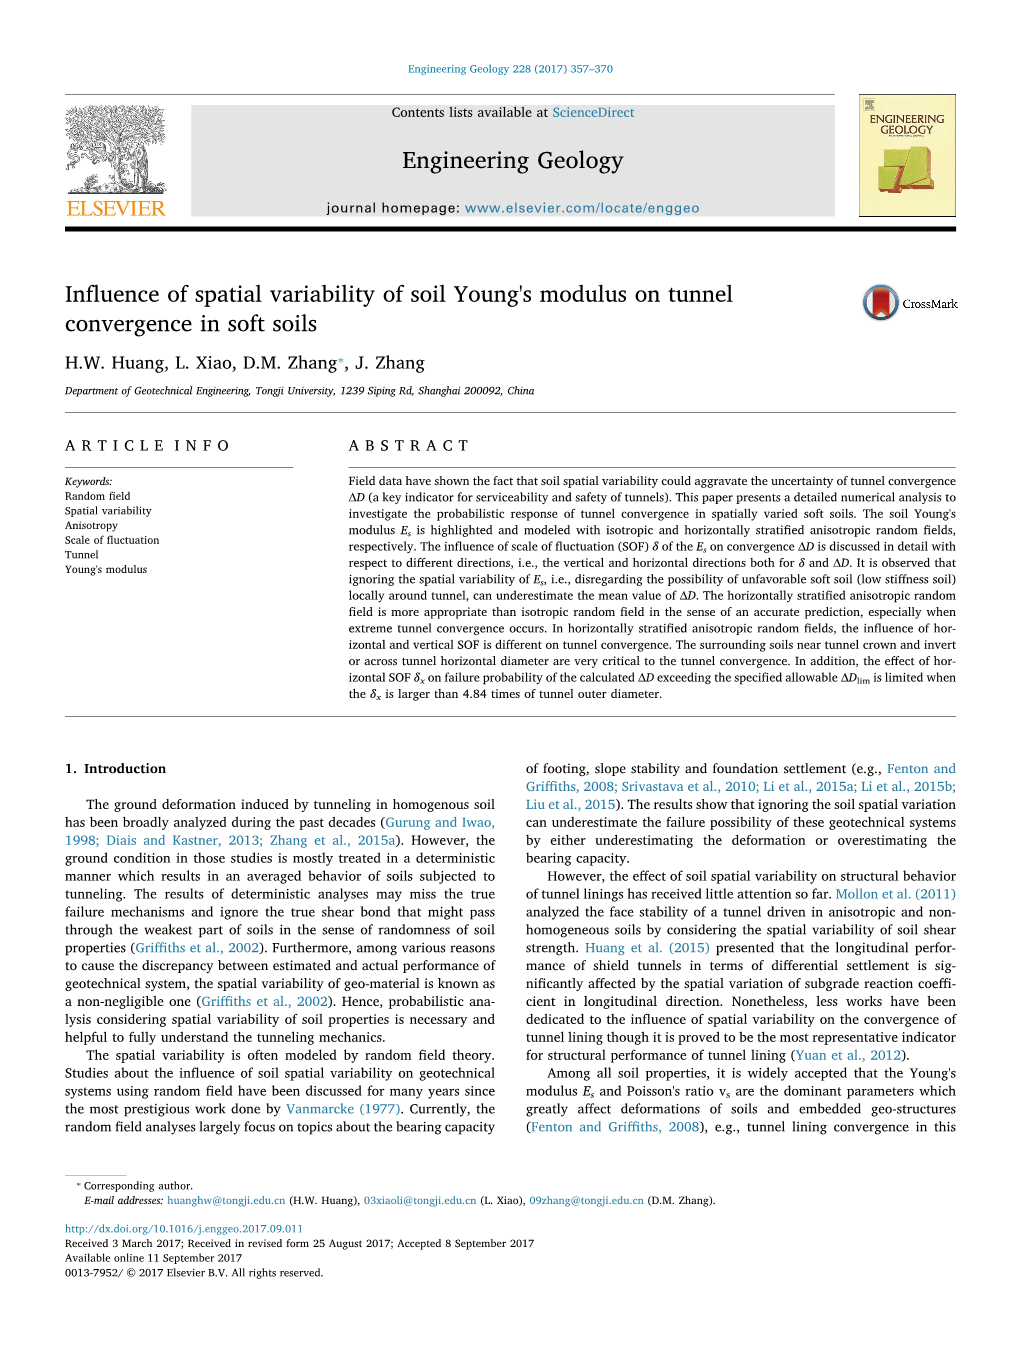 Influence of Spatial Variability of Soil Young's Modulus on Tunnel